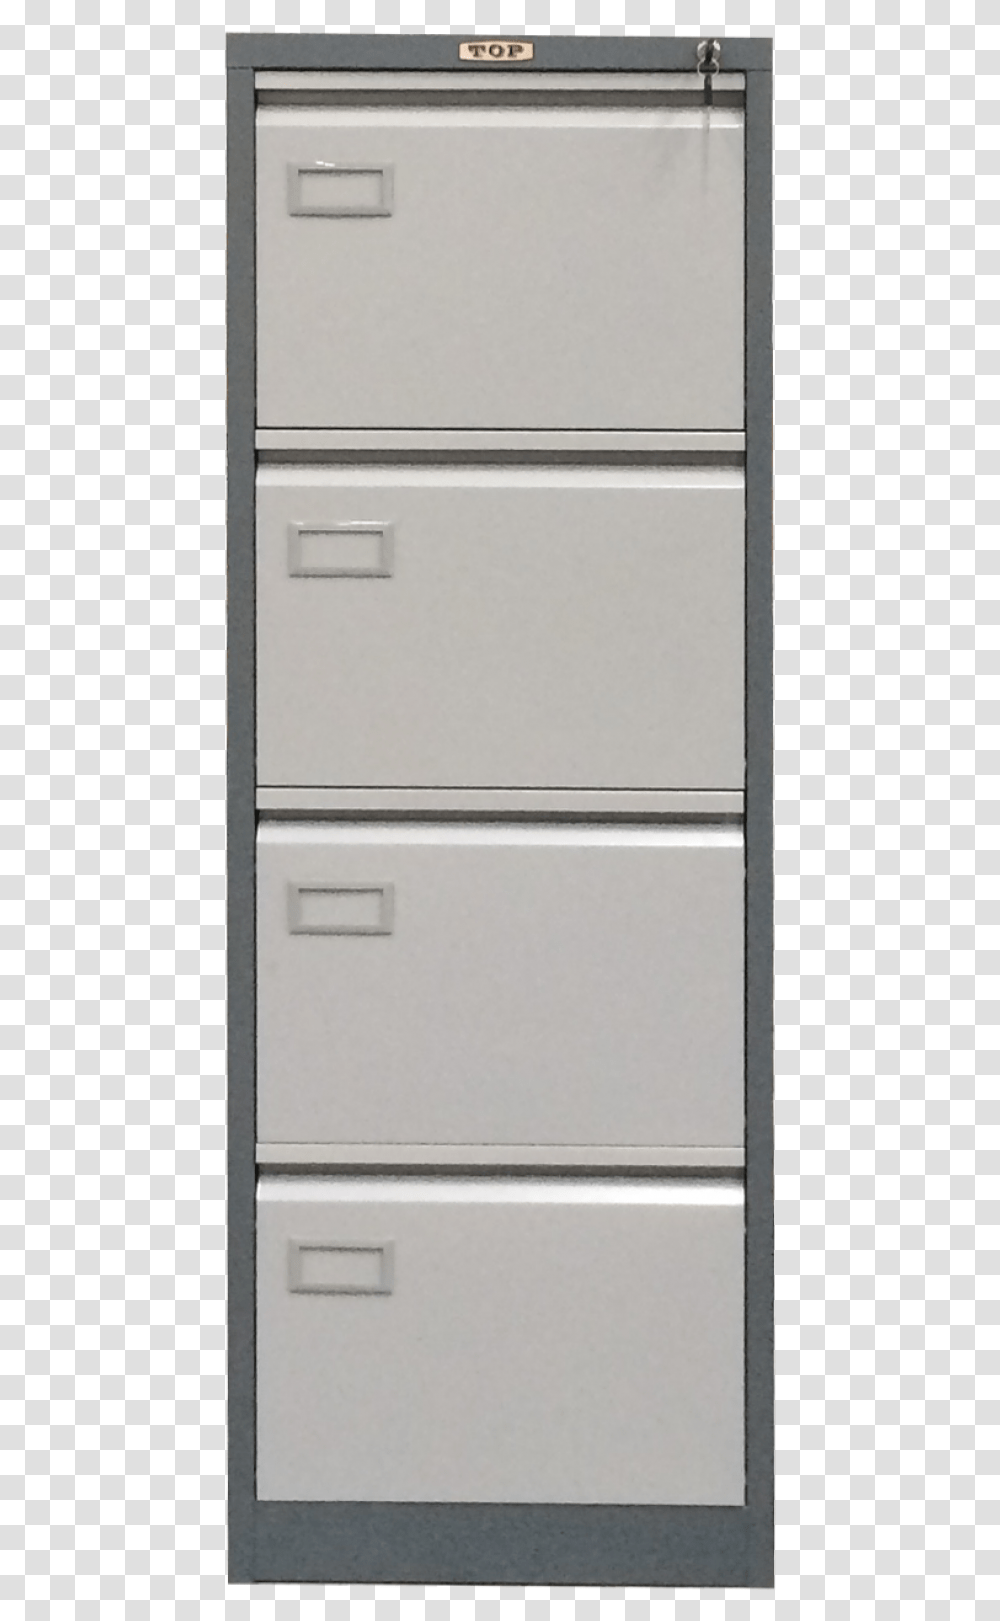 File Cabinet, Private Mailbox, Letterbox, Furniture Transparent Png